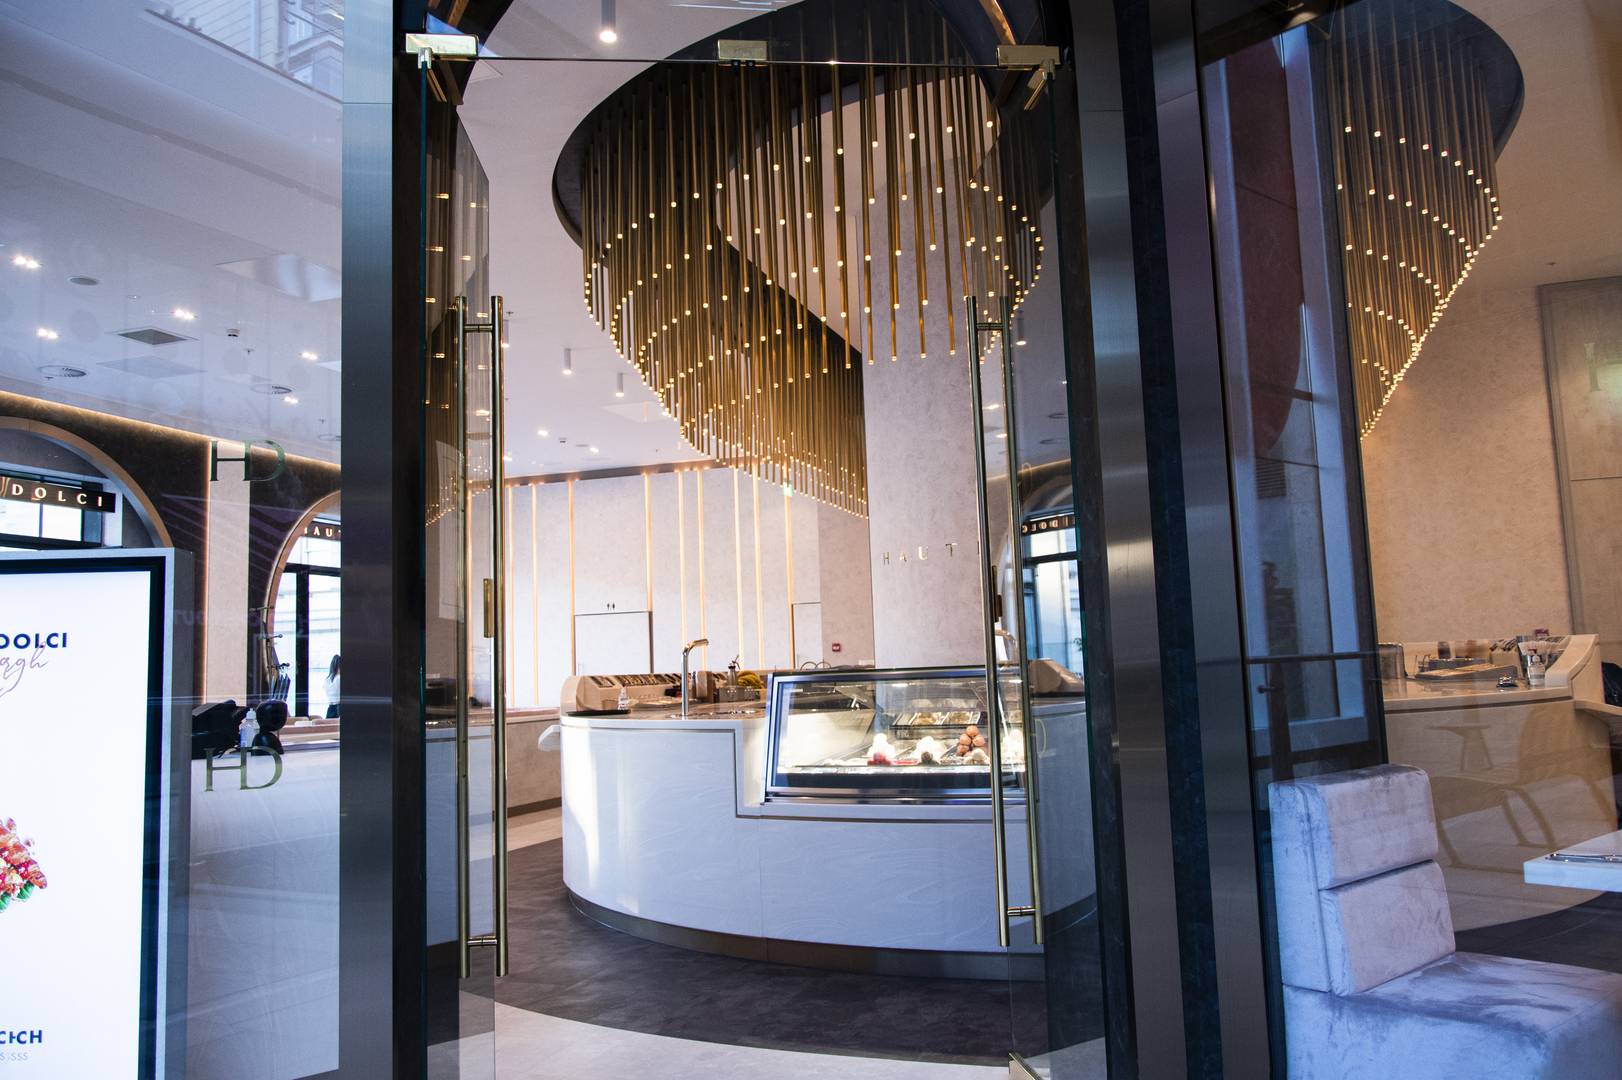 A view from the front door of the dessert counter and large gold light feature.,© Haute Dolci